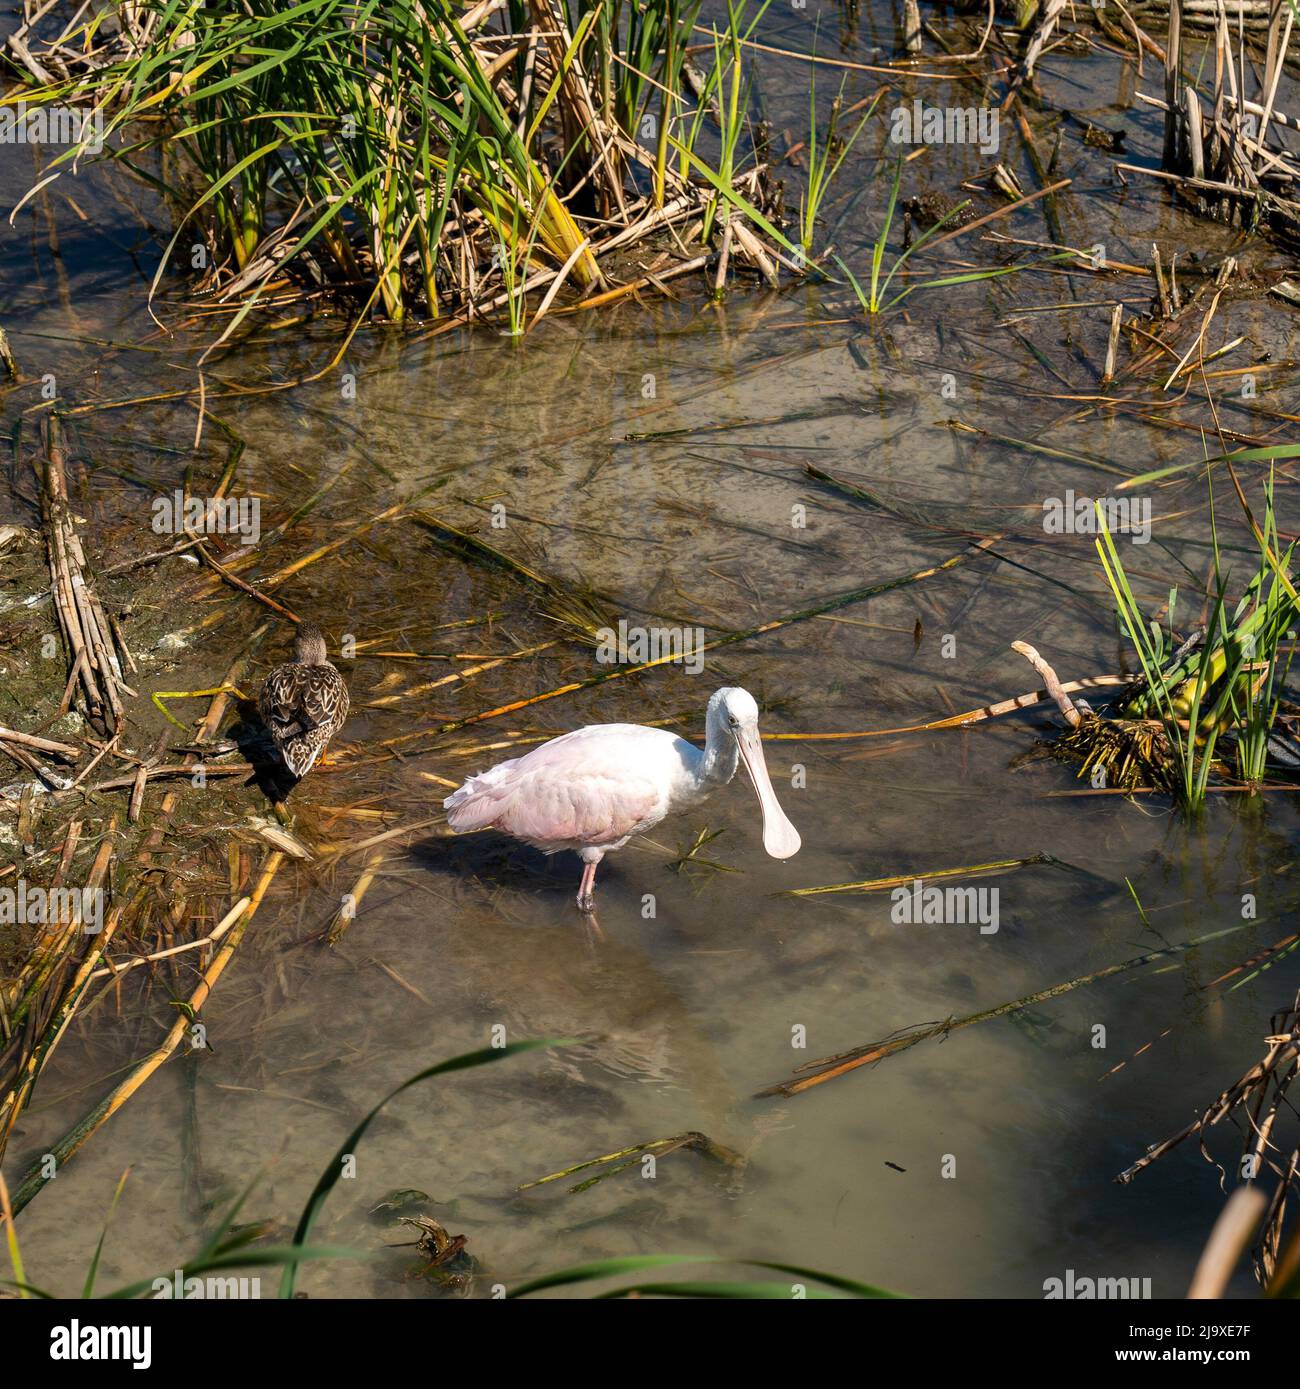 Roseate spoonbill Platalea ajaja eating in the muddy water at a bird center in Texas, Weeds and other birds, are also visible. Stock Photo